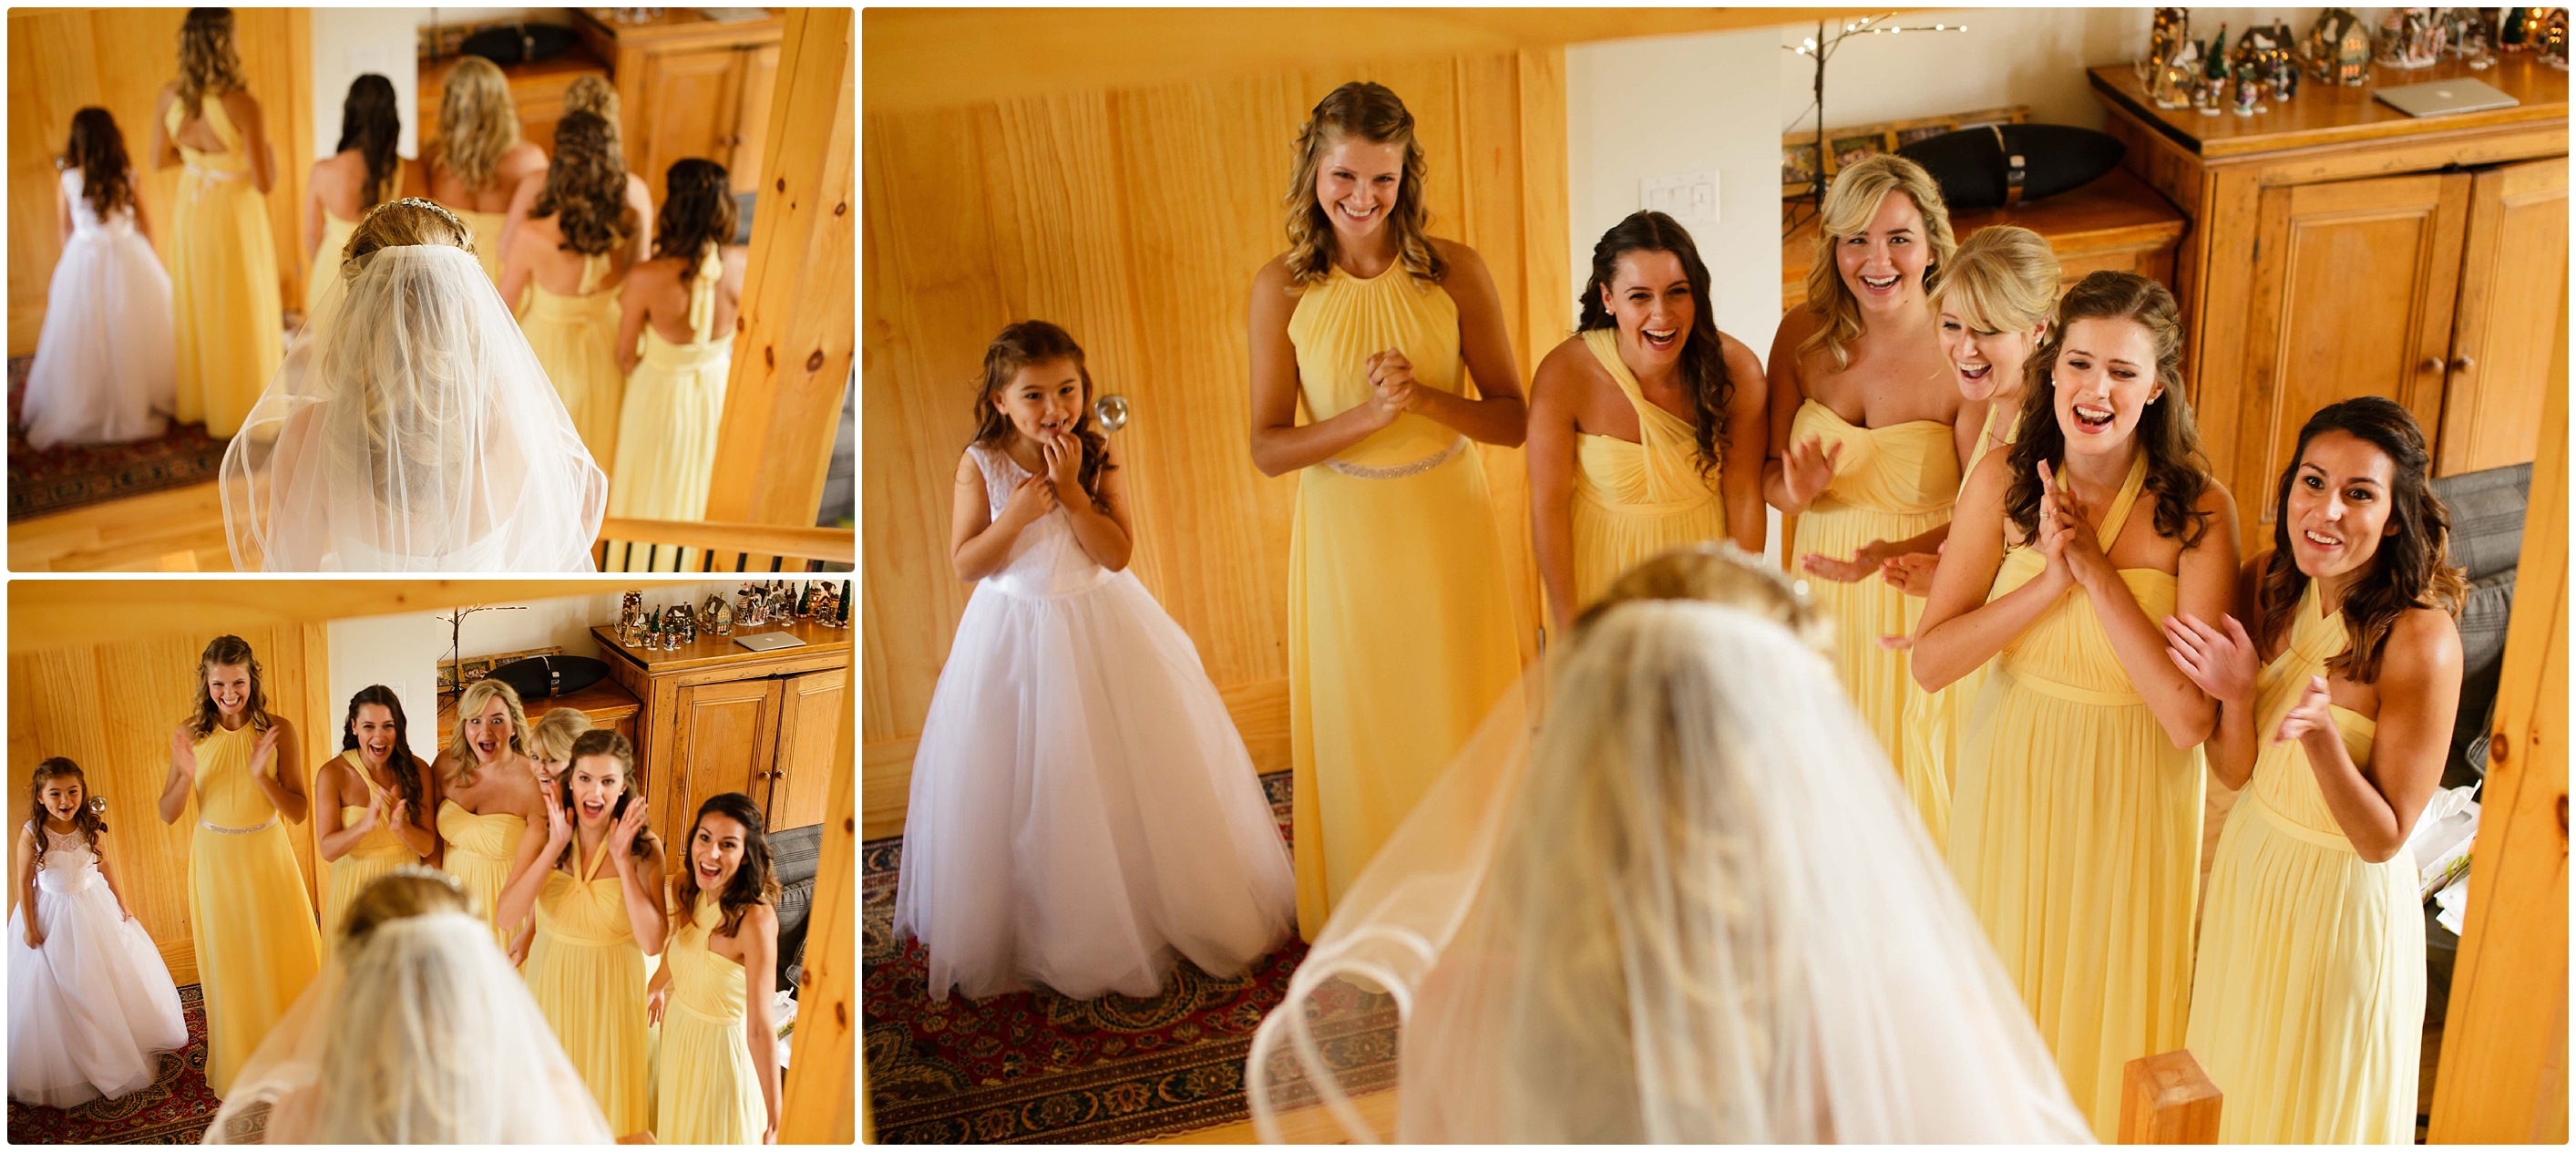 Bridal Party Reveal